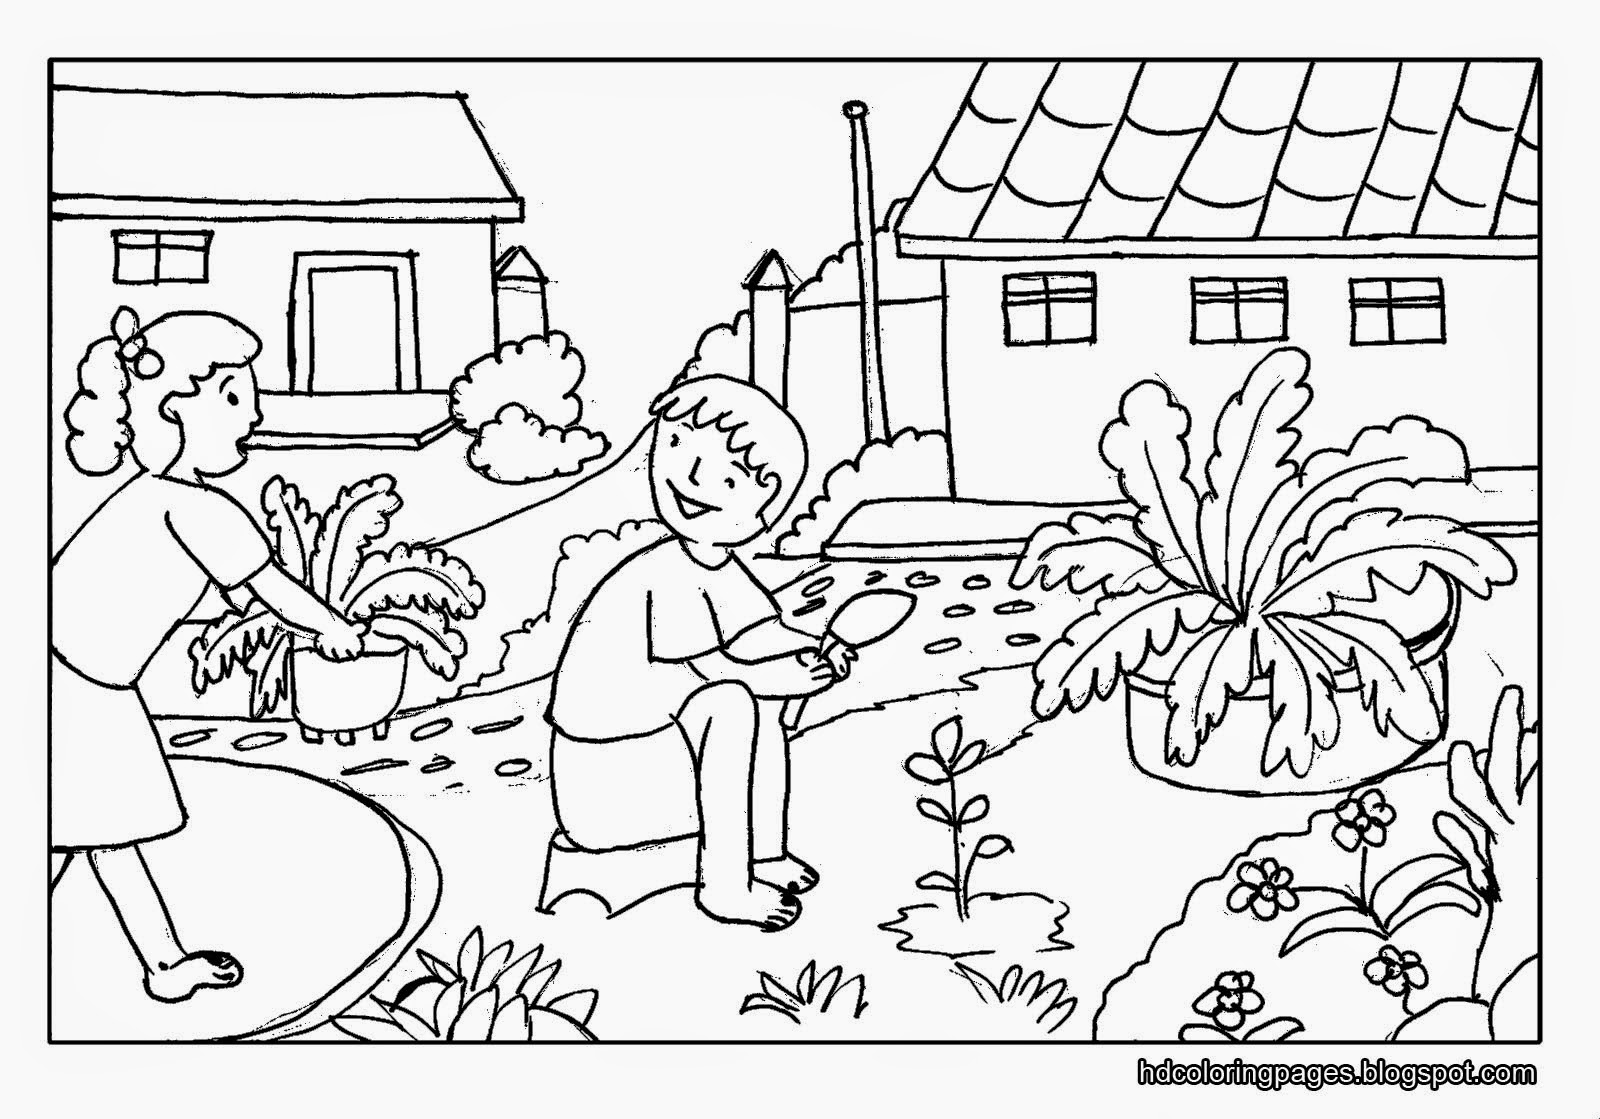 Free Coloring Pages Spring Gardens - Hot Girls Wallpaper